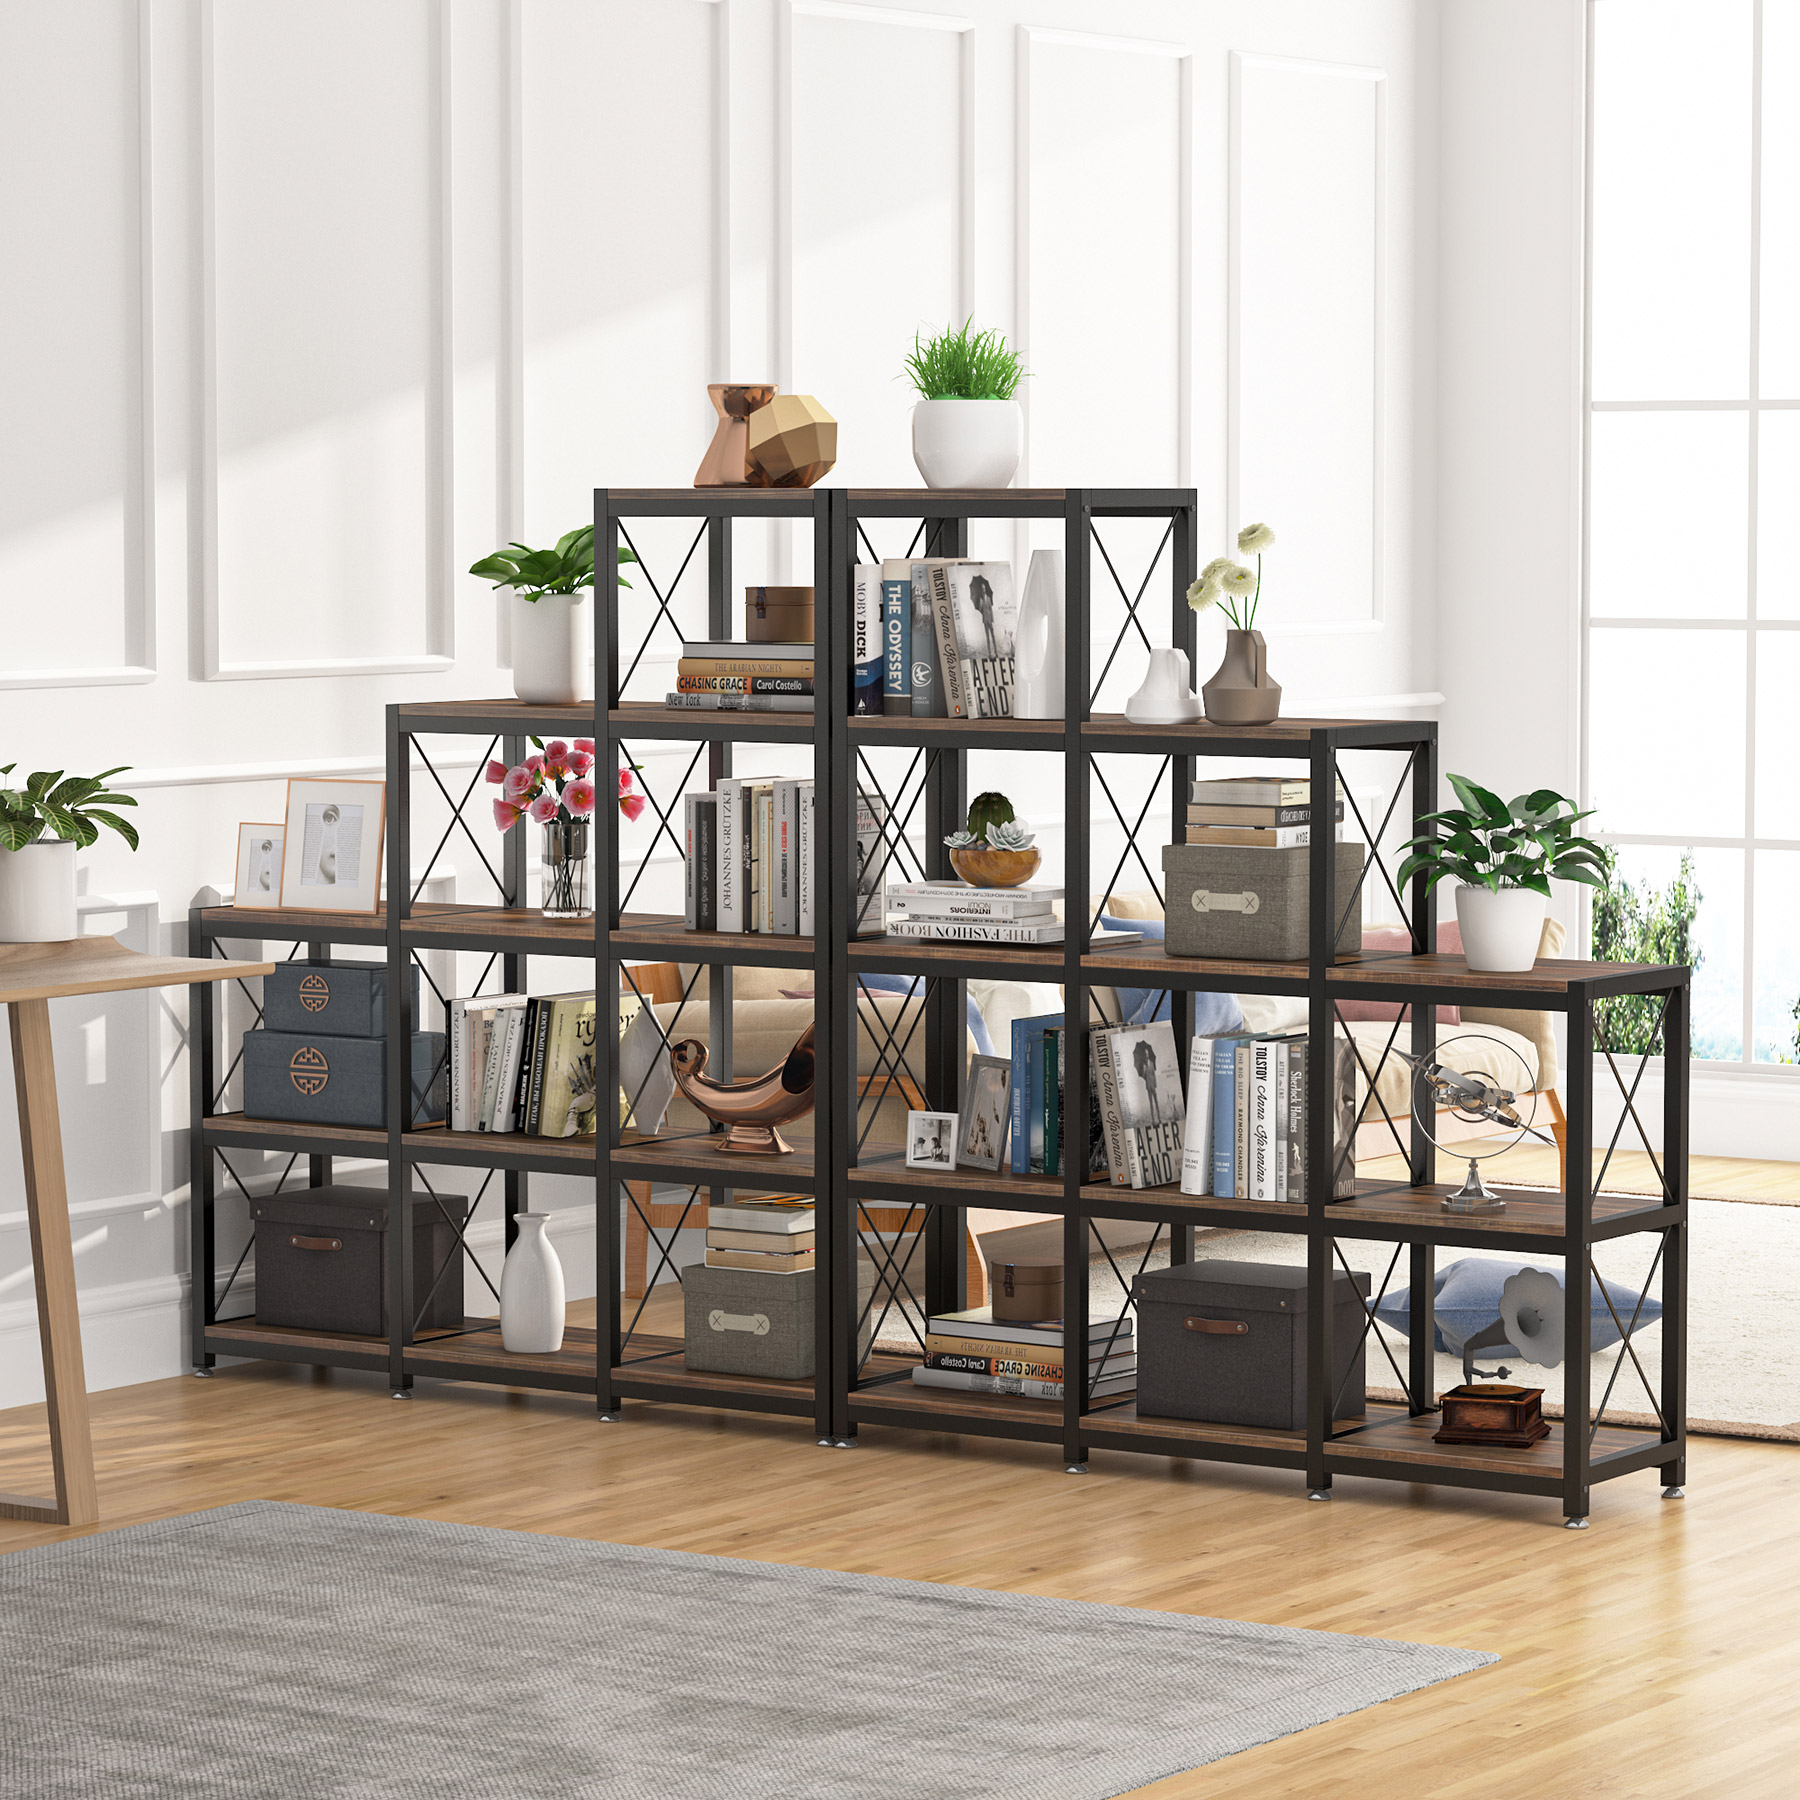 Tribesigns 12-shelf Bookcase, 5-tier Industrial Step Bookshelf for Home Office, Rustic Brown - image 4 of 7